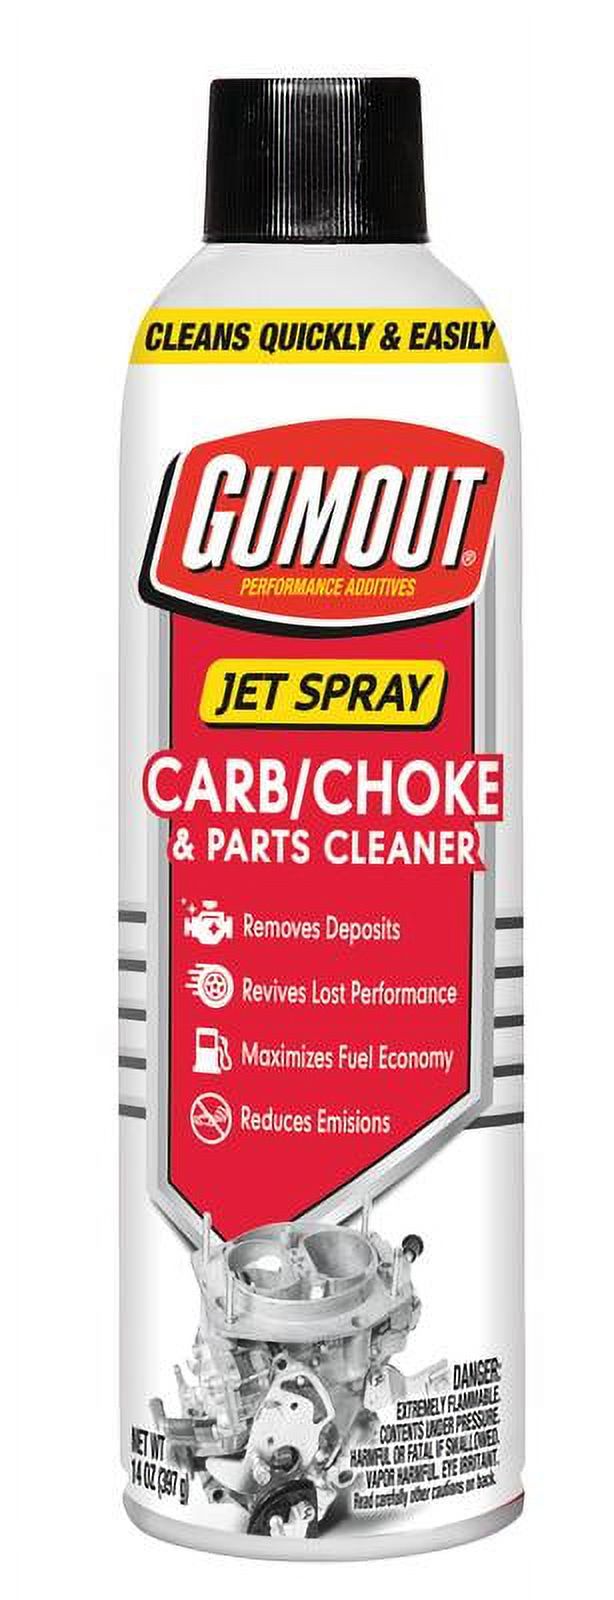 Gumout Carb/Choke and Parts Cleaner 14 oz - 800002231W - image 1 of 5